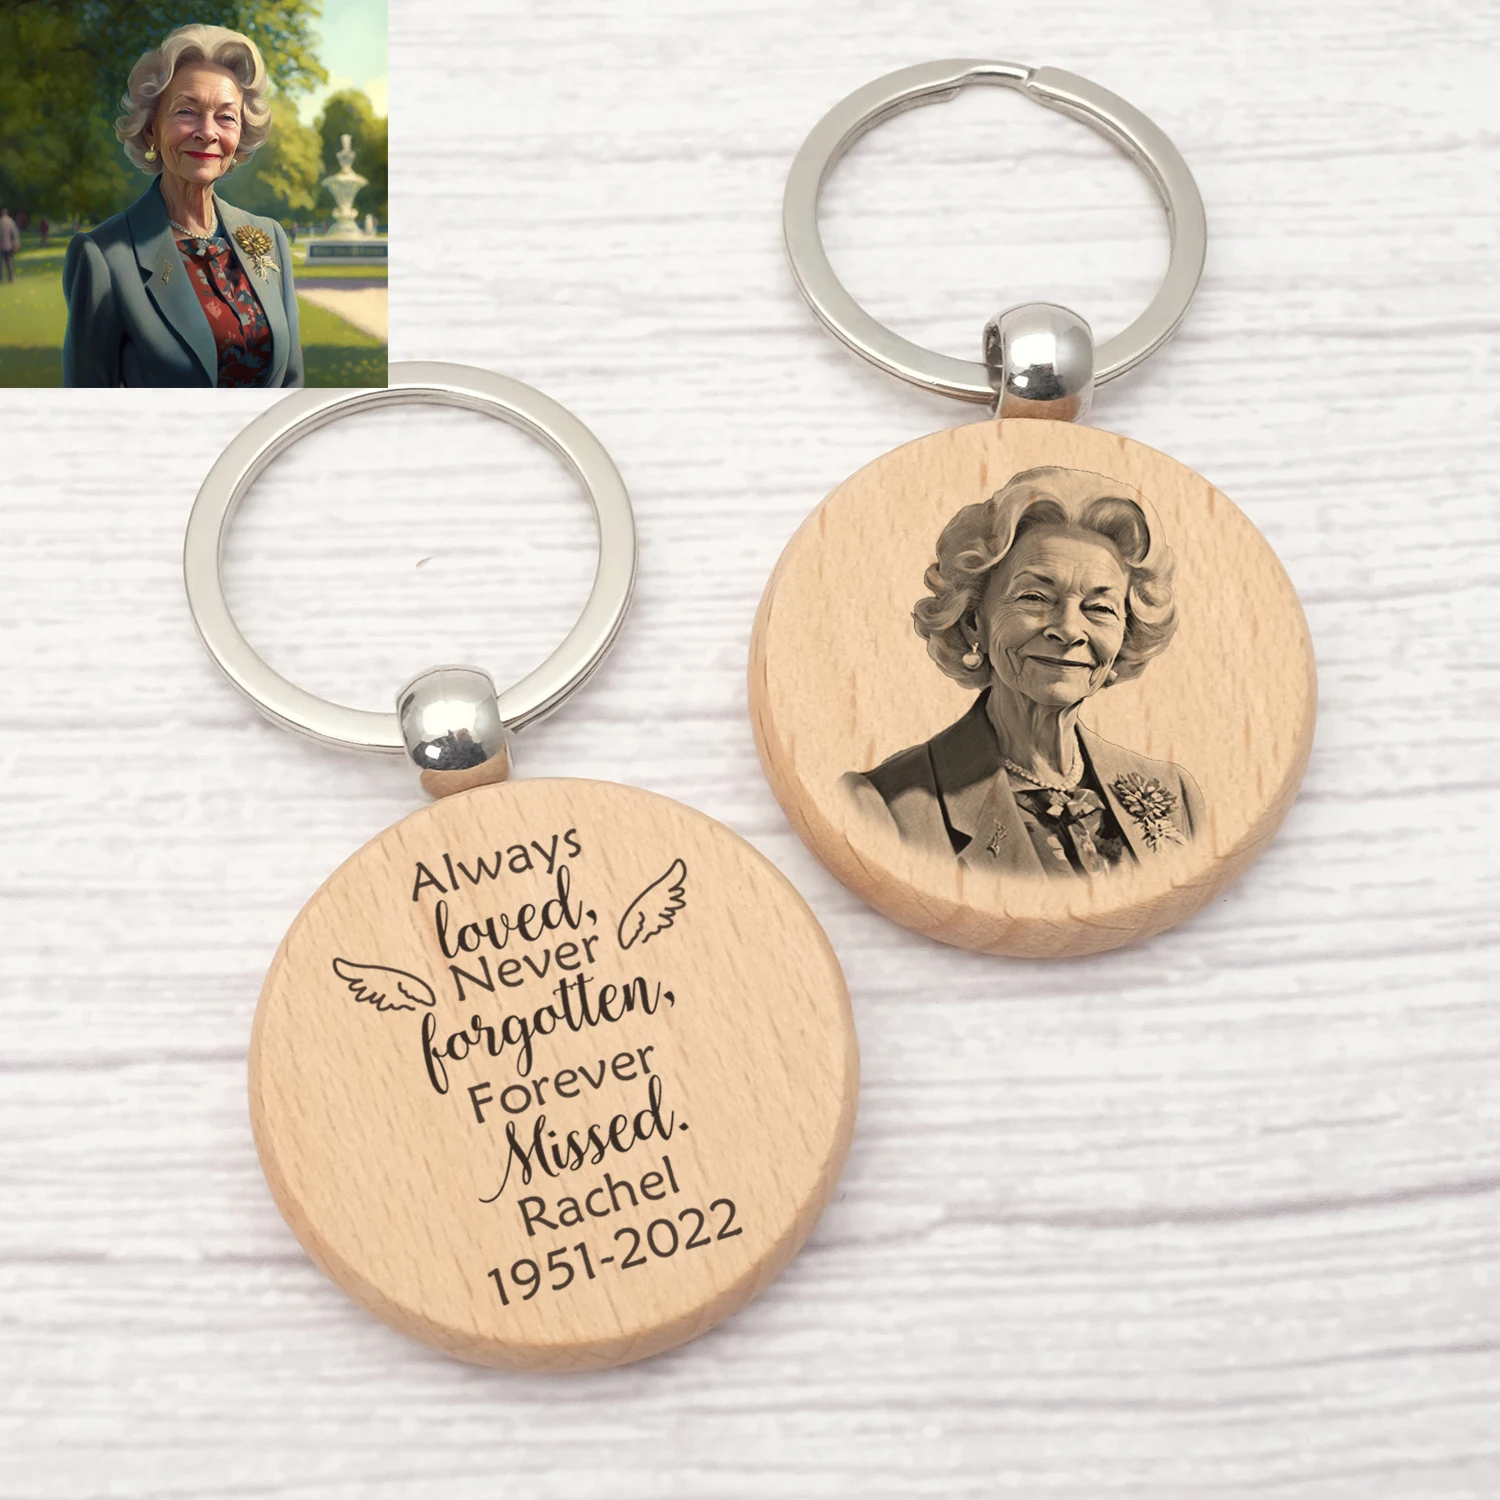 Custom Memorial Keychain Personalized Photo Key Ring Engraved Your Text Sympathy Gifts for Loss of Loved One Family Friends Gift custom keychain personalized wooden vintage key ring customize your photo text logo keychains jewelry gift for friends family